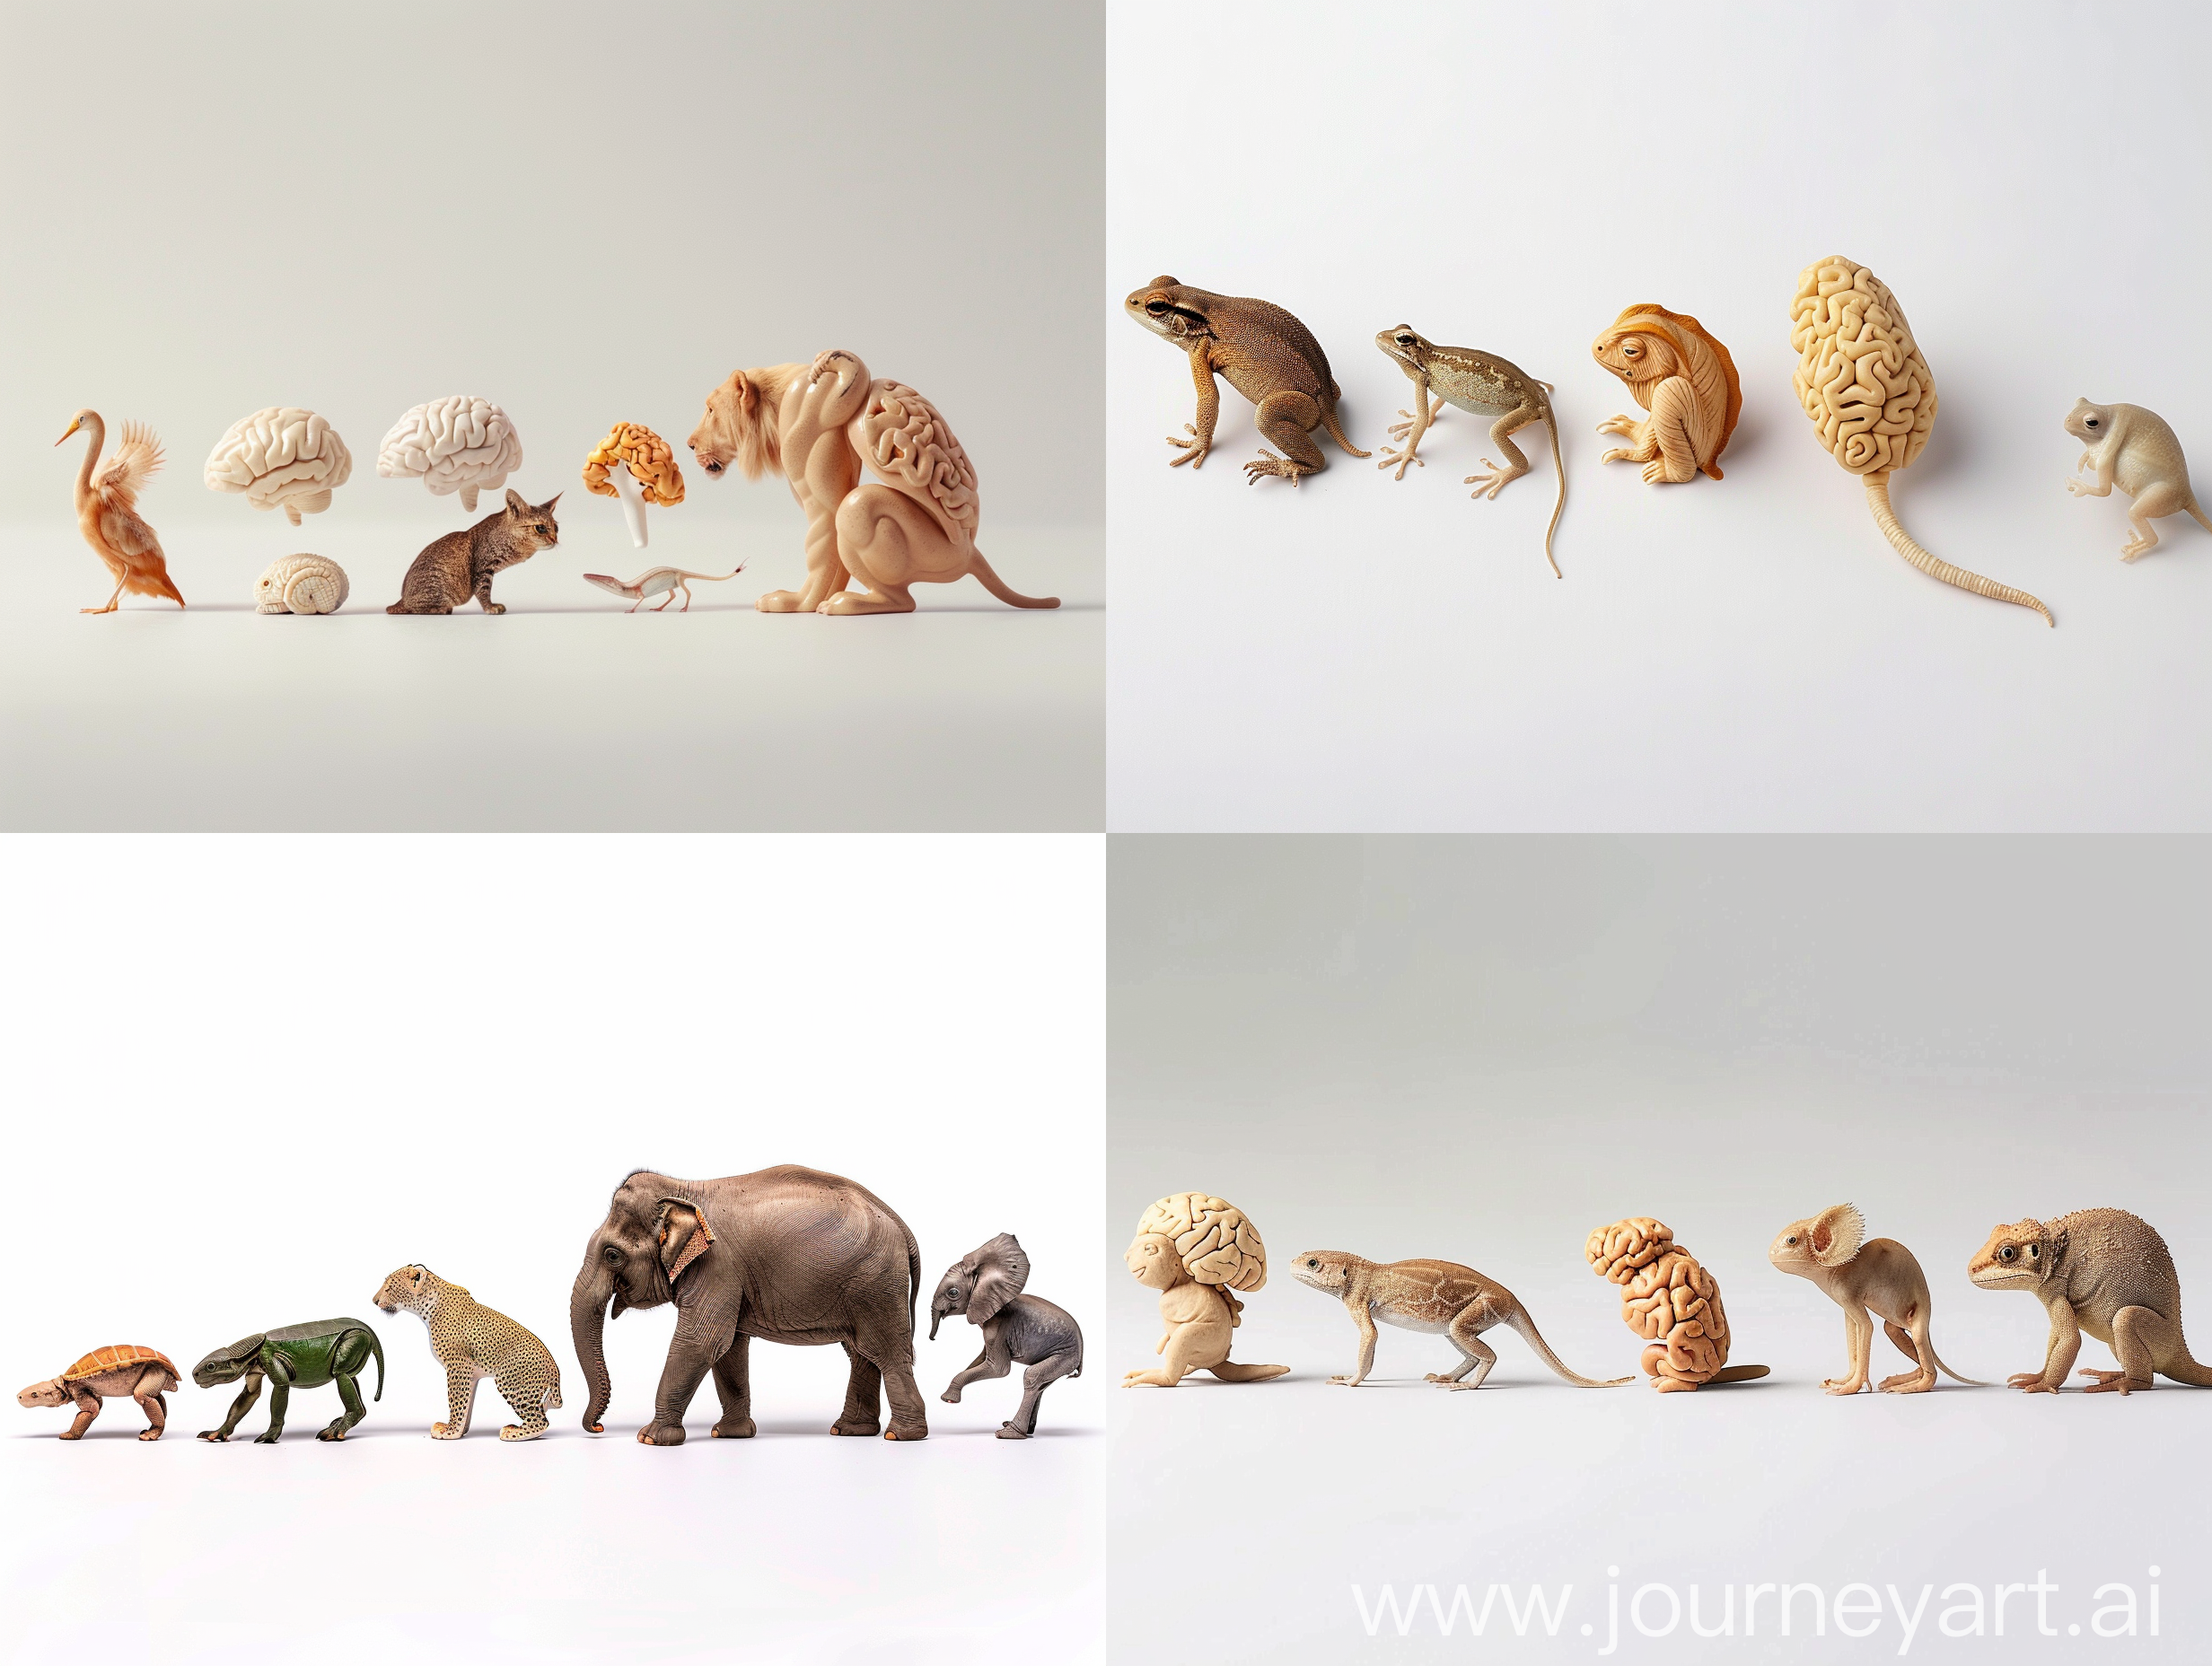 create an minimal image representing the concept of intelligence development among species with white background